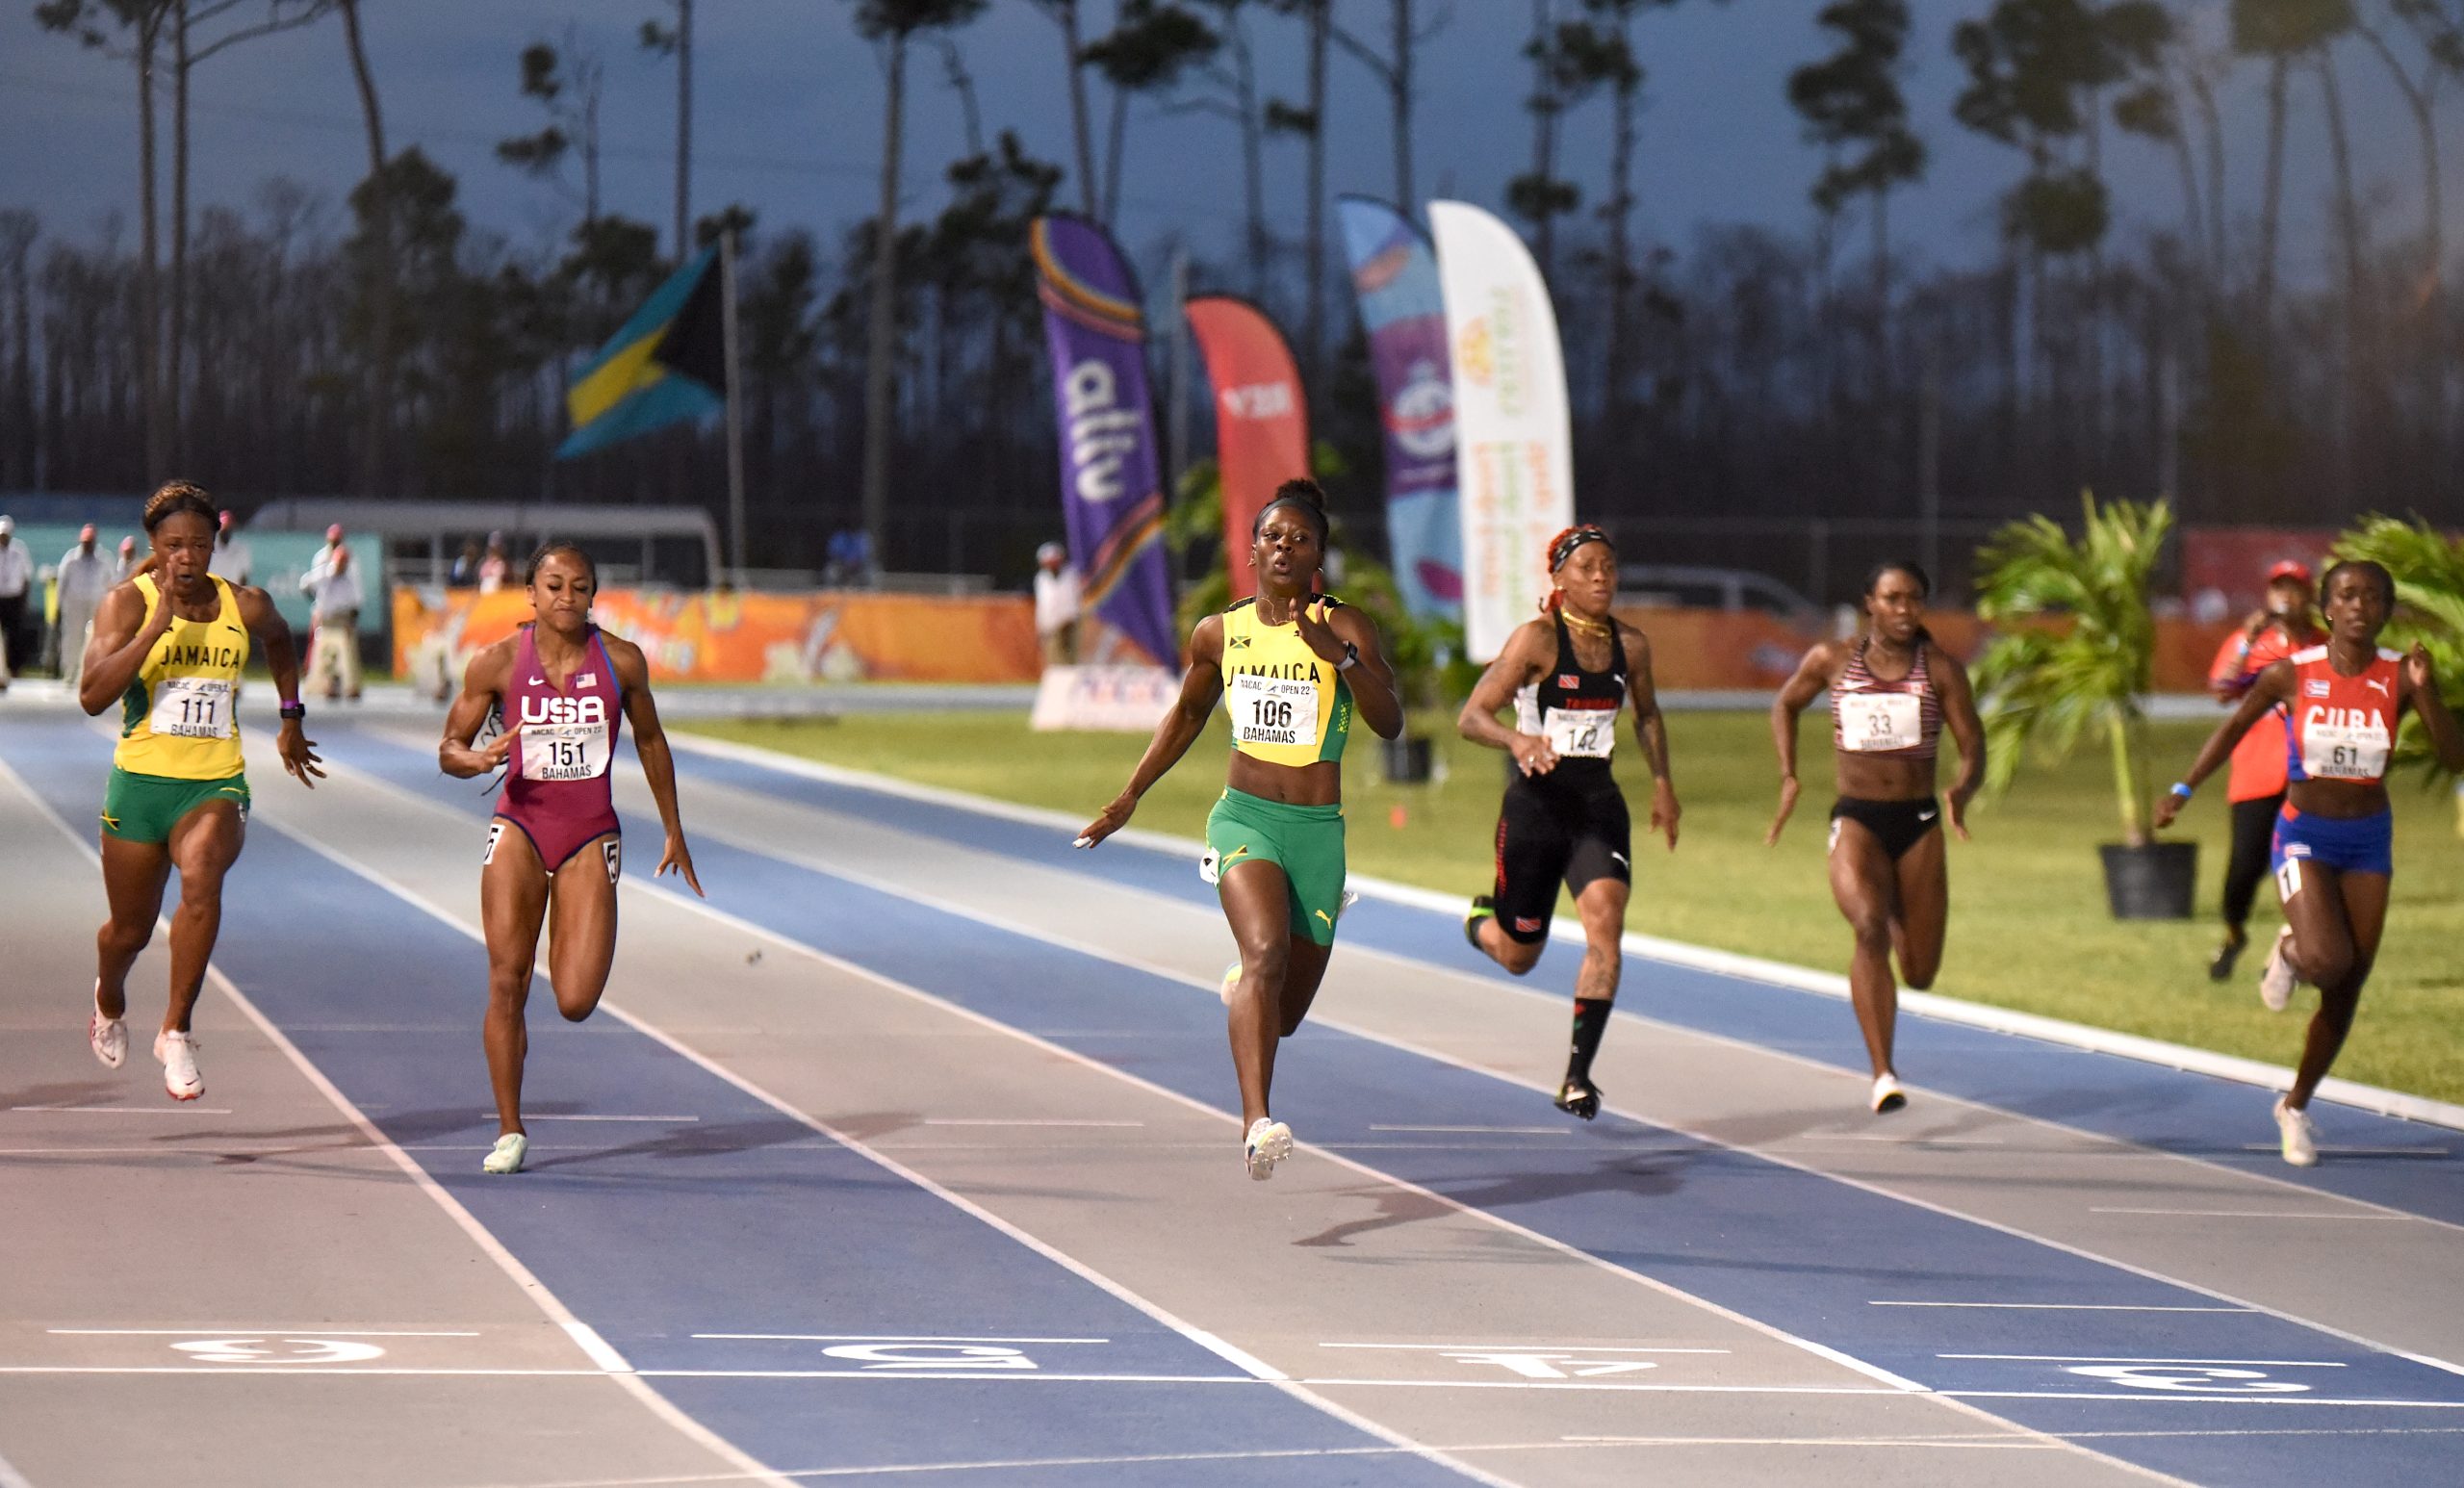 Shericka Jackson wins the women's 100m in a championship record 10.83 at the NACAC Open Championships in Freeport, Grand Bahamas.